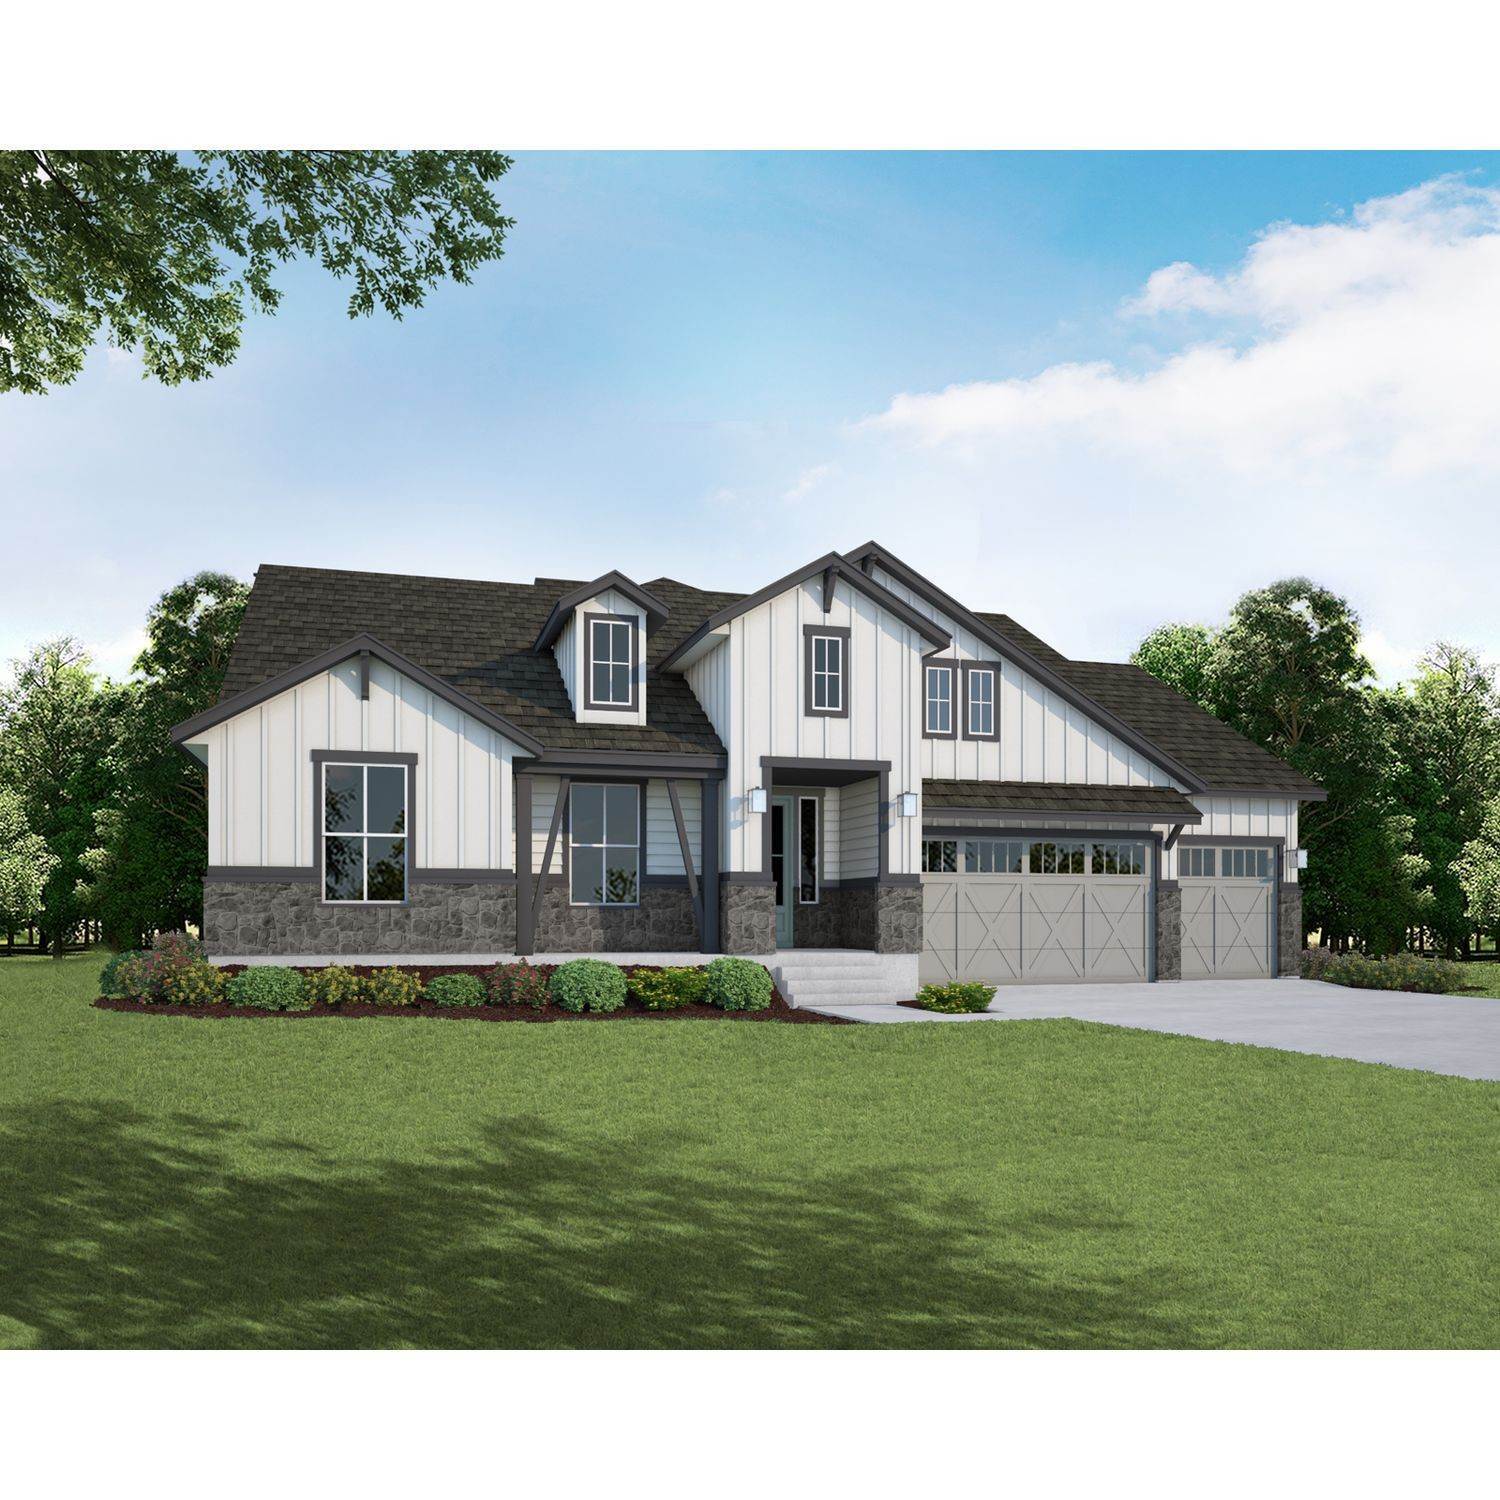 Single Family for Sale at Hilltop At Inspiration 75s- 55+ 8405 South Winnipeg Court, Aurora, CO 80016